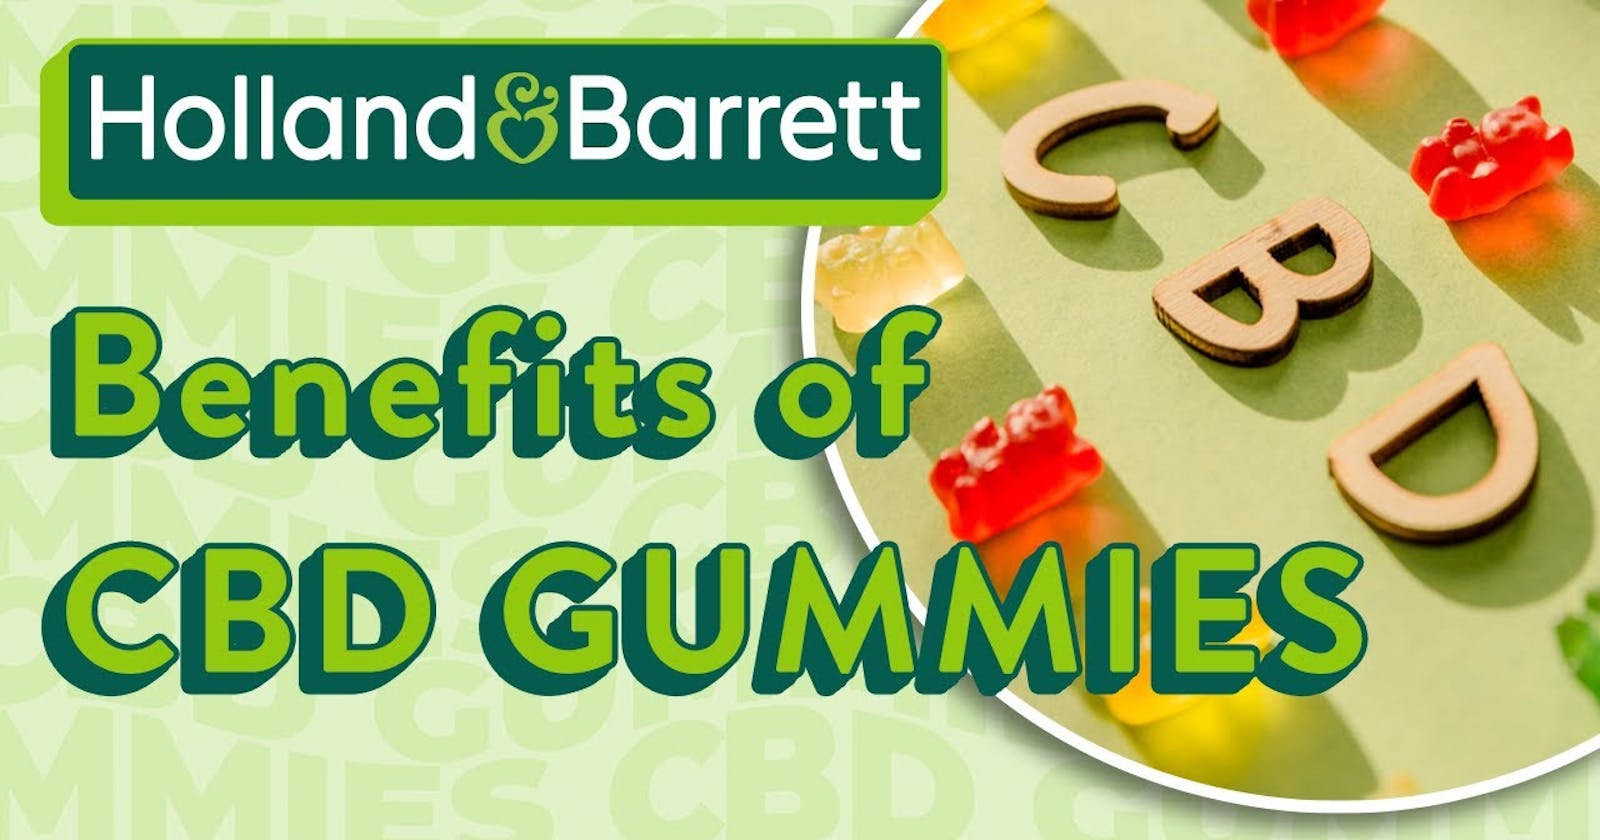 Push CBD Gummies Reviews SHOCKING Report Know The Side Effects And Ingredients Used In CBD Gummies Trustworthy Brand or Cheap CBD Gummy?